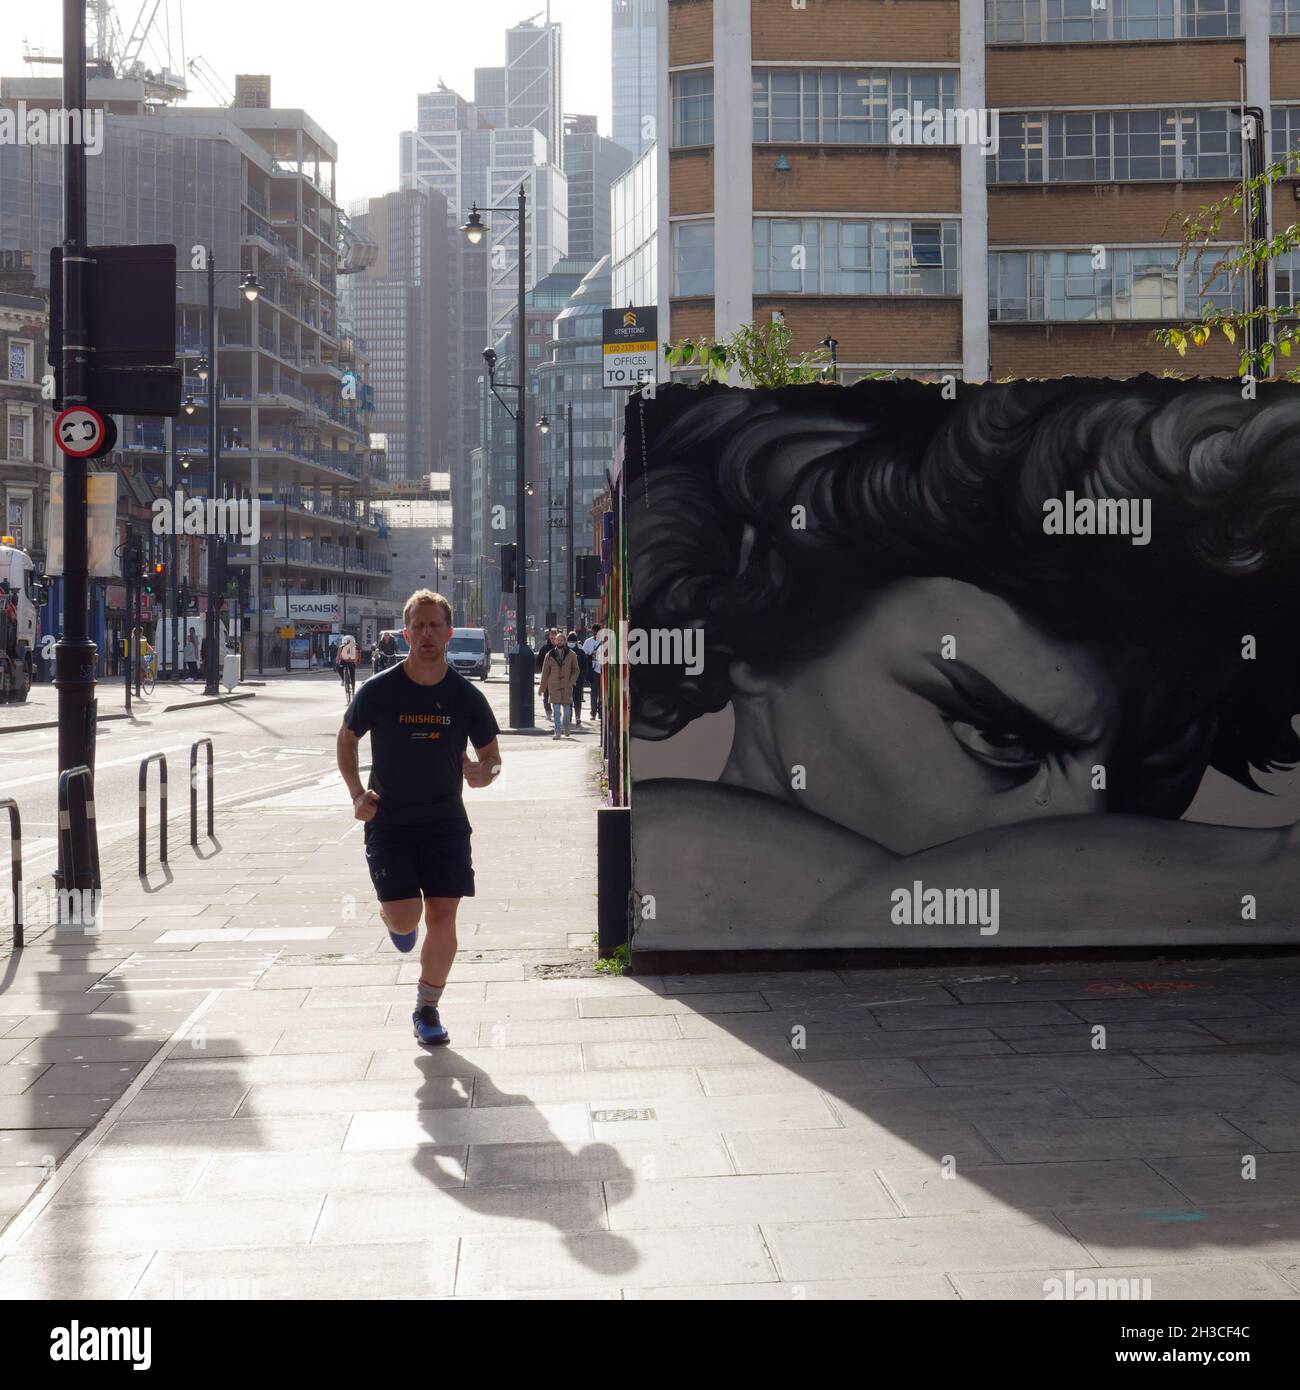 London, Greater London, England, October 26 2021: A man runs past Street art in Shoreditch with skyscrapers in the background. Stock Photo